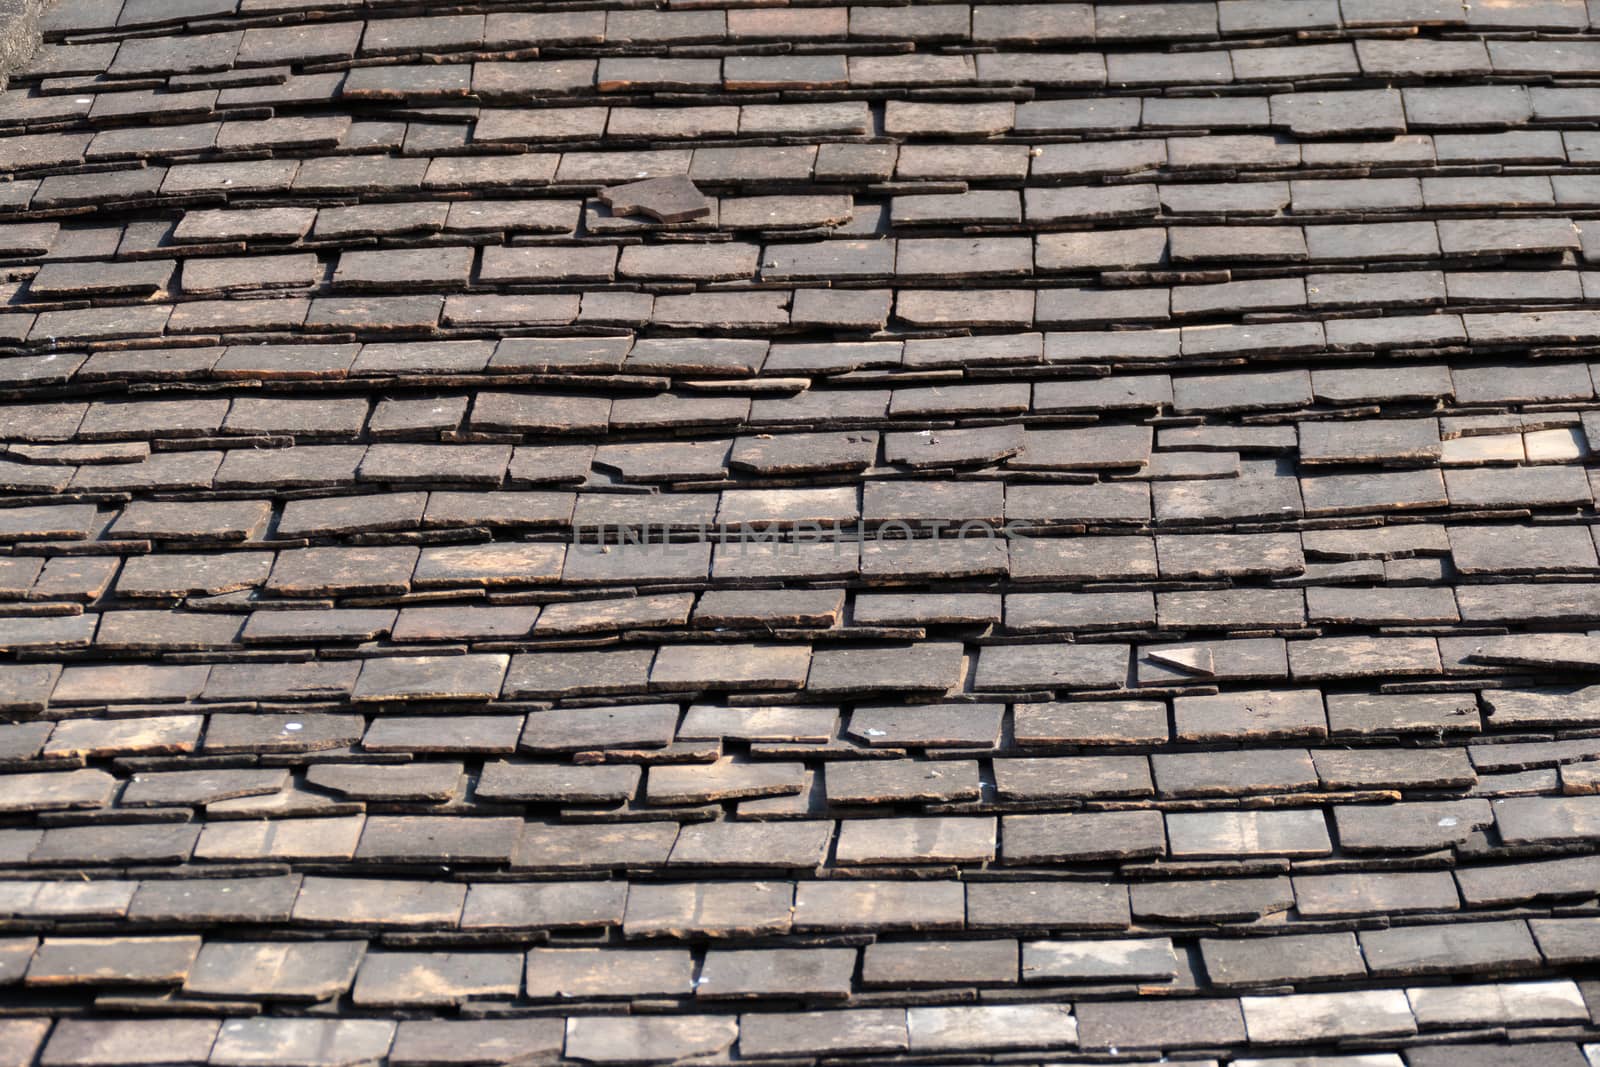 Abstract Detail of Old Slate Roof Tiles, abstract background